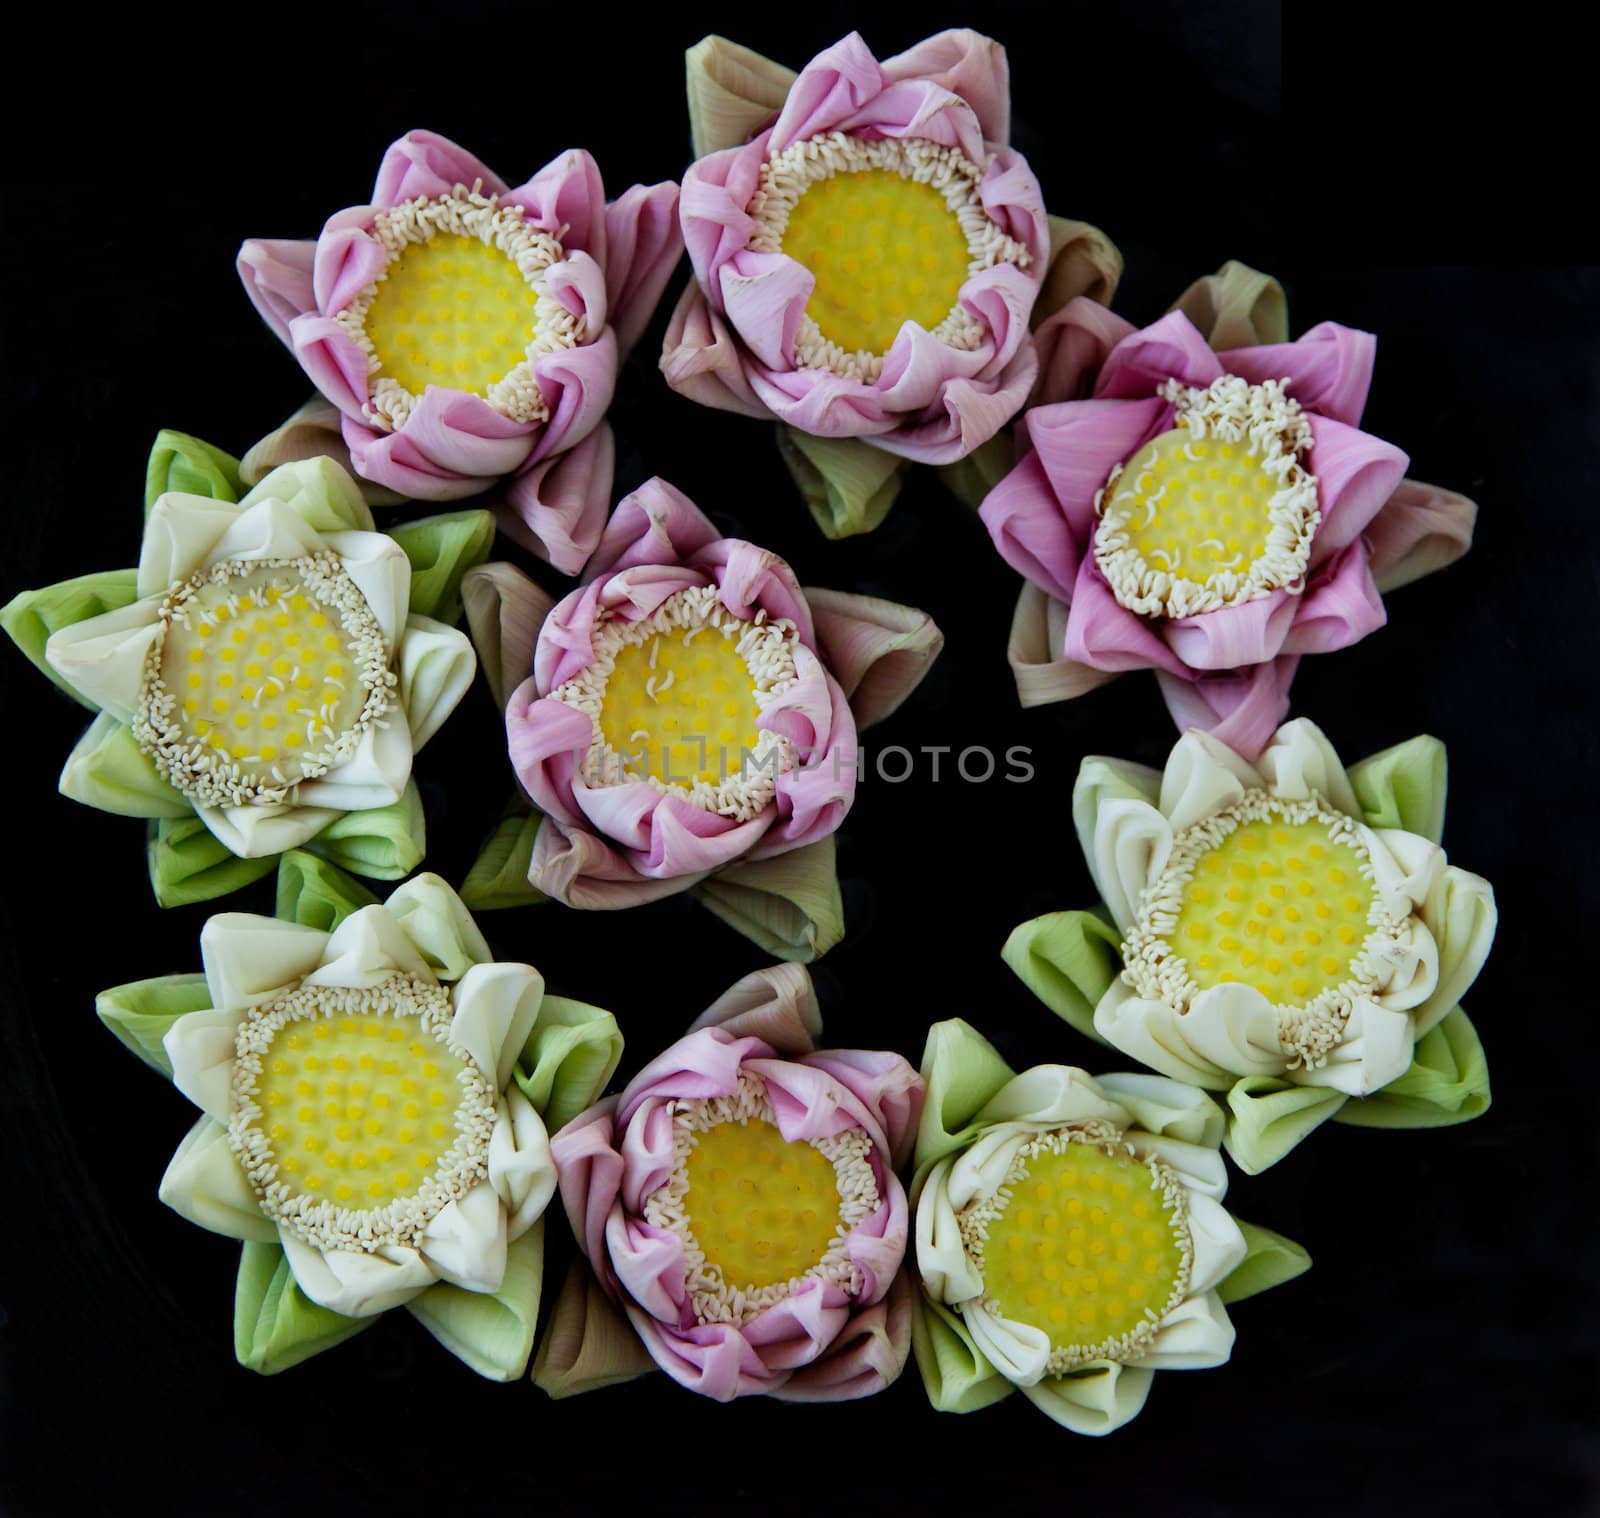 Multicolored lotus flowers on black background in a spa